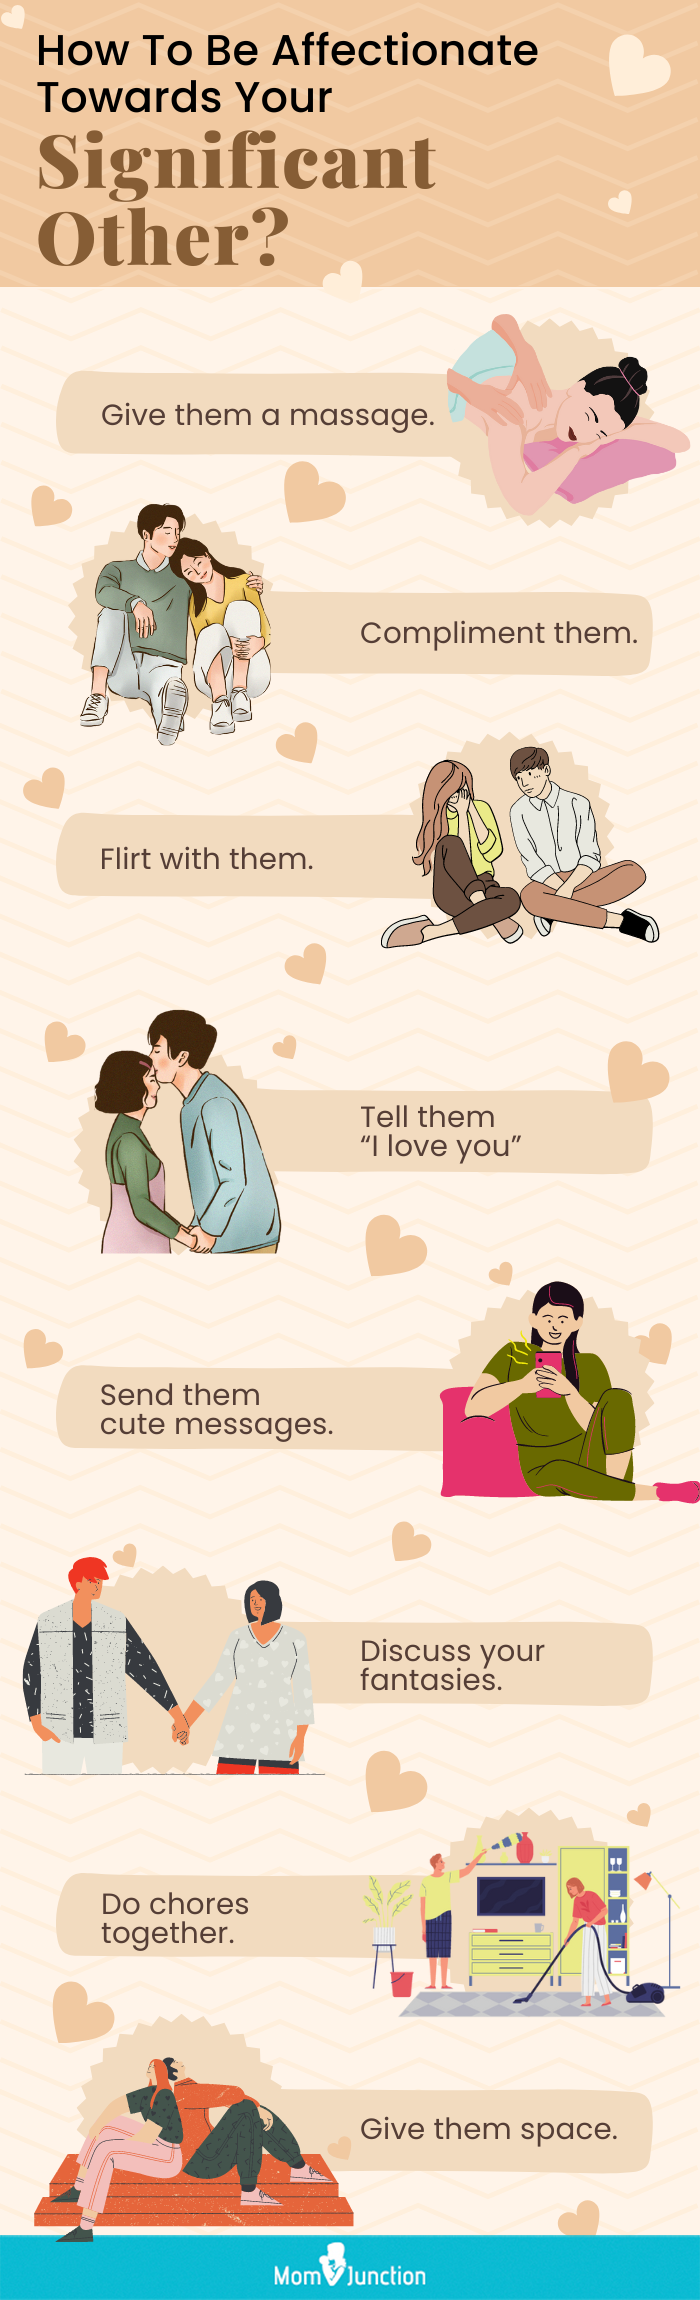 how to be affectionate towards your significant other (infographic)